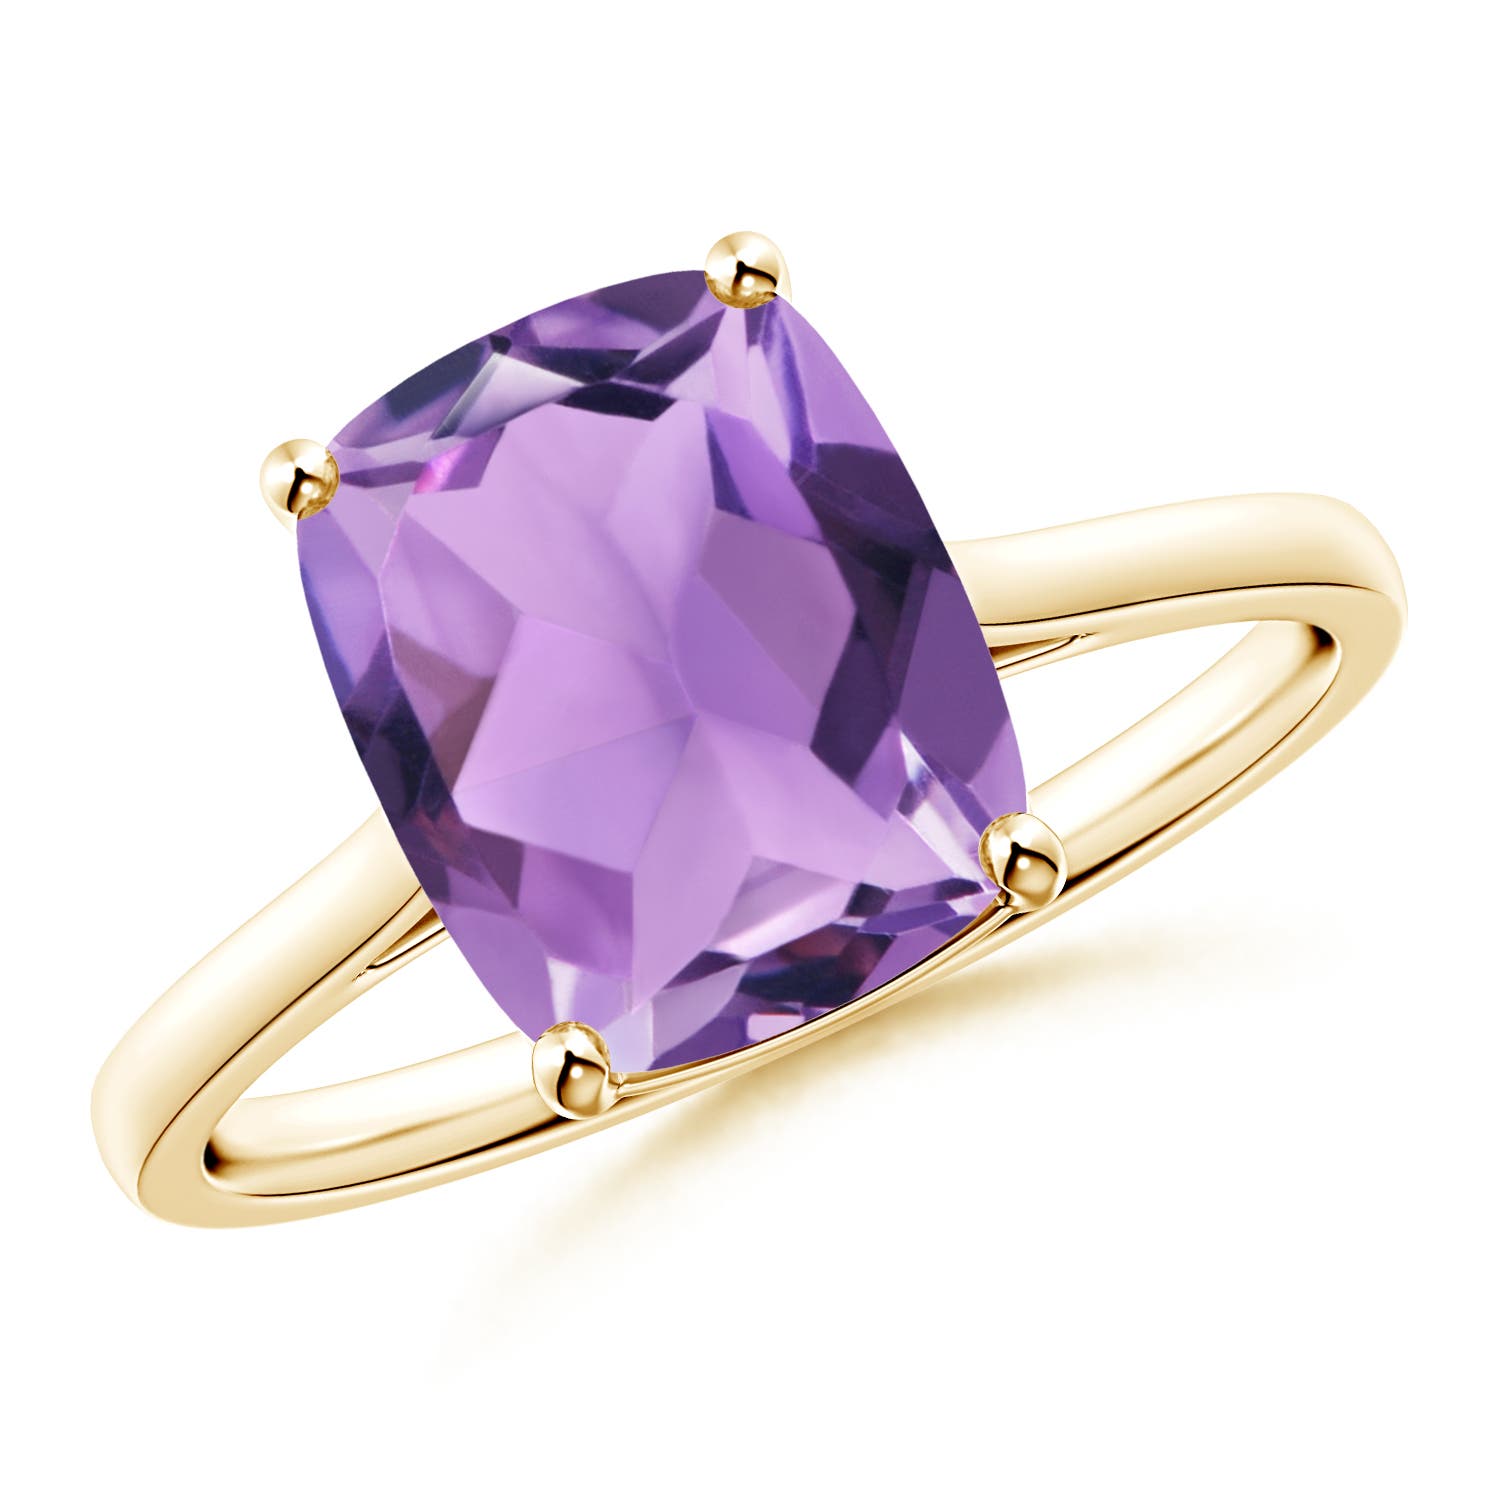 A - Amethyst / 2.7 CT / 14 KT Yellow Gold